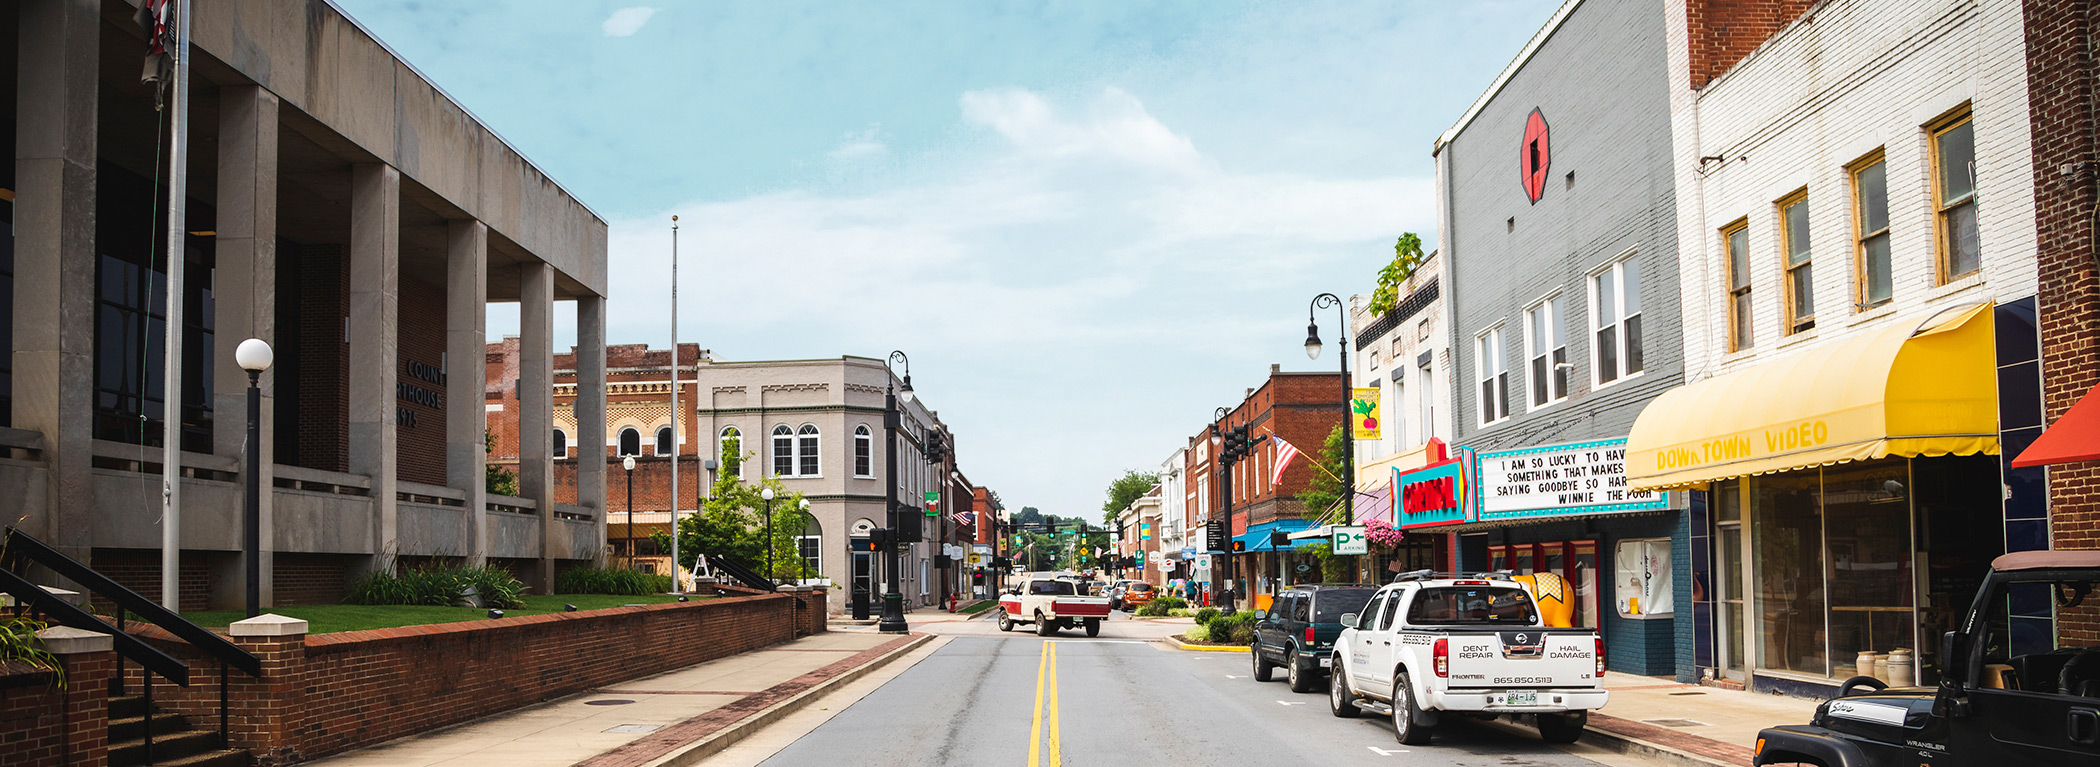 Unicoi County. A Zoom Town for Finding A New Place to Live or Build A Business